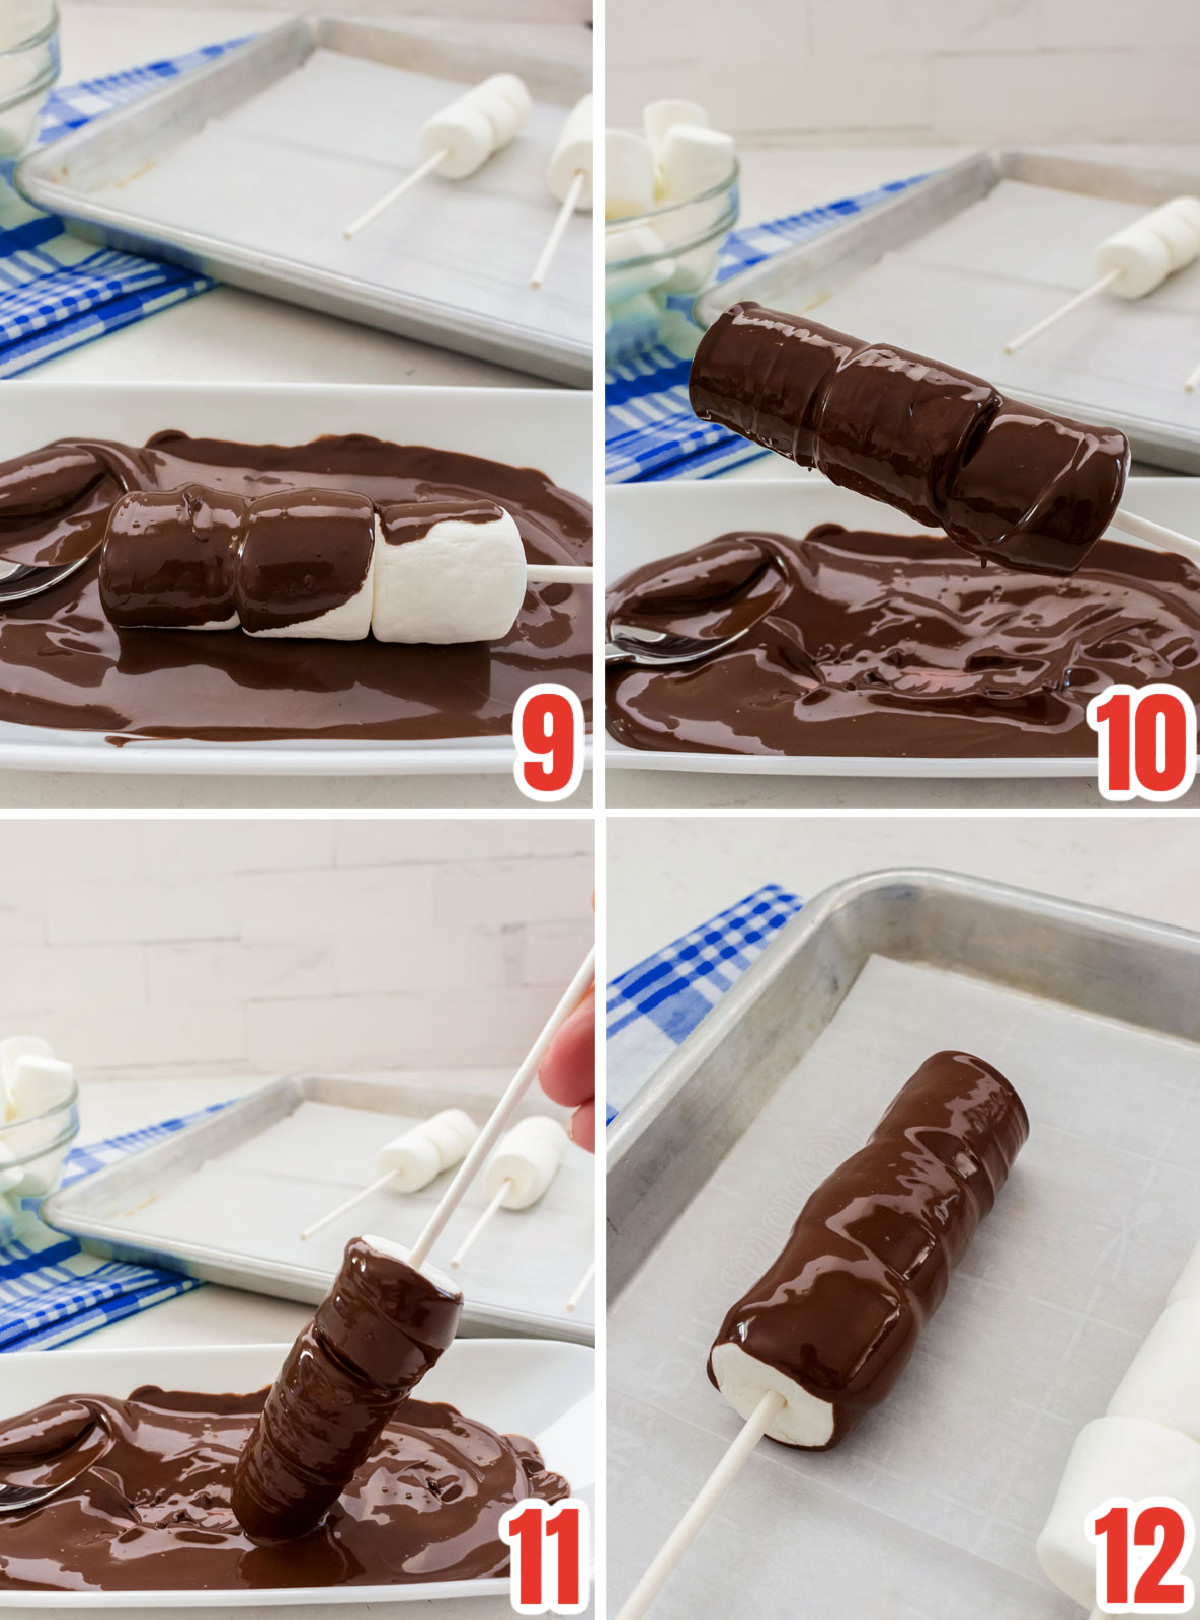 Collage image showing how to cover the marshmallow pop in chocolate.